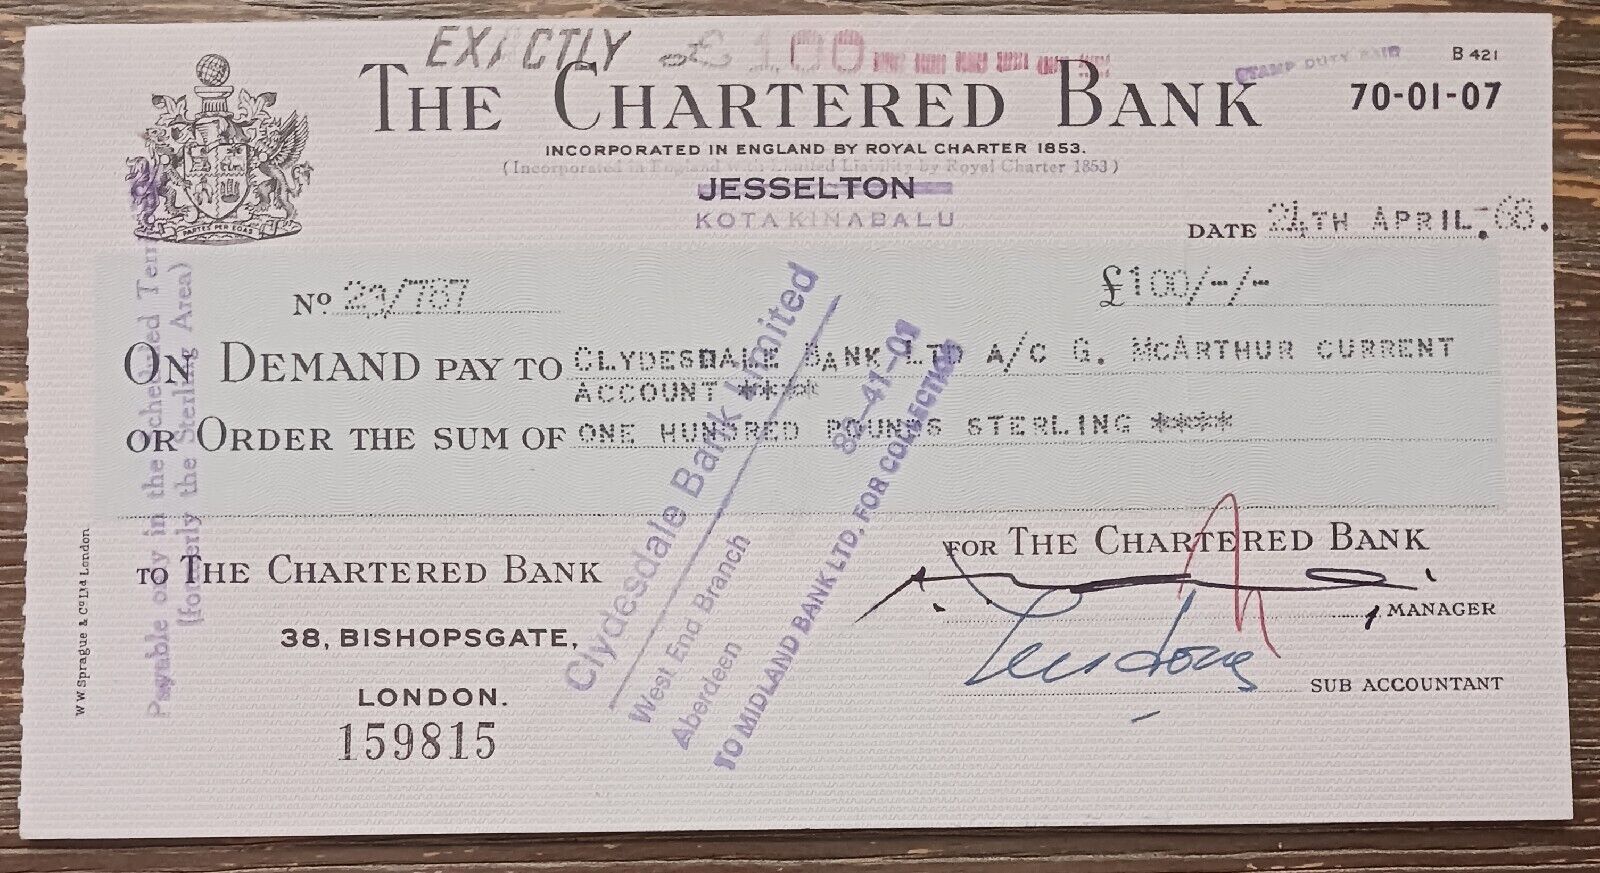 1968 - JESSELTON - THE CHARTERED BANK - £100/-/- - N° 23/787 - PRE OWNED 